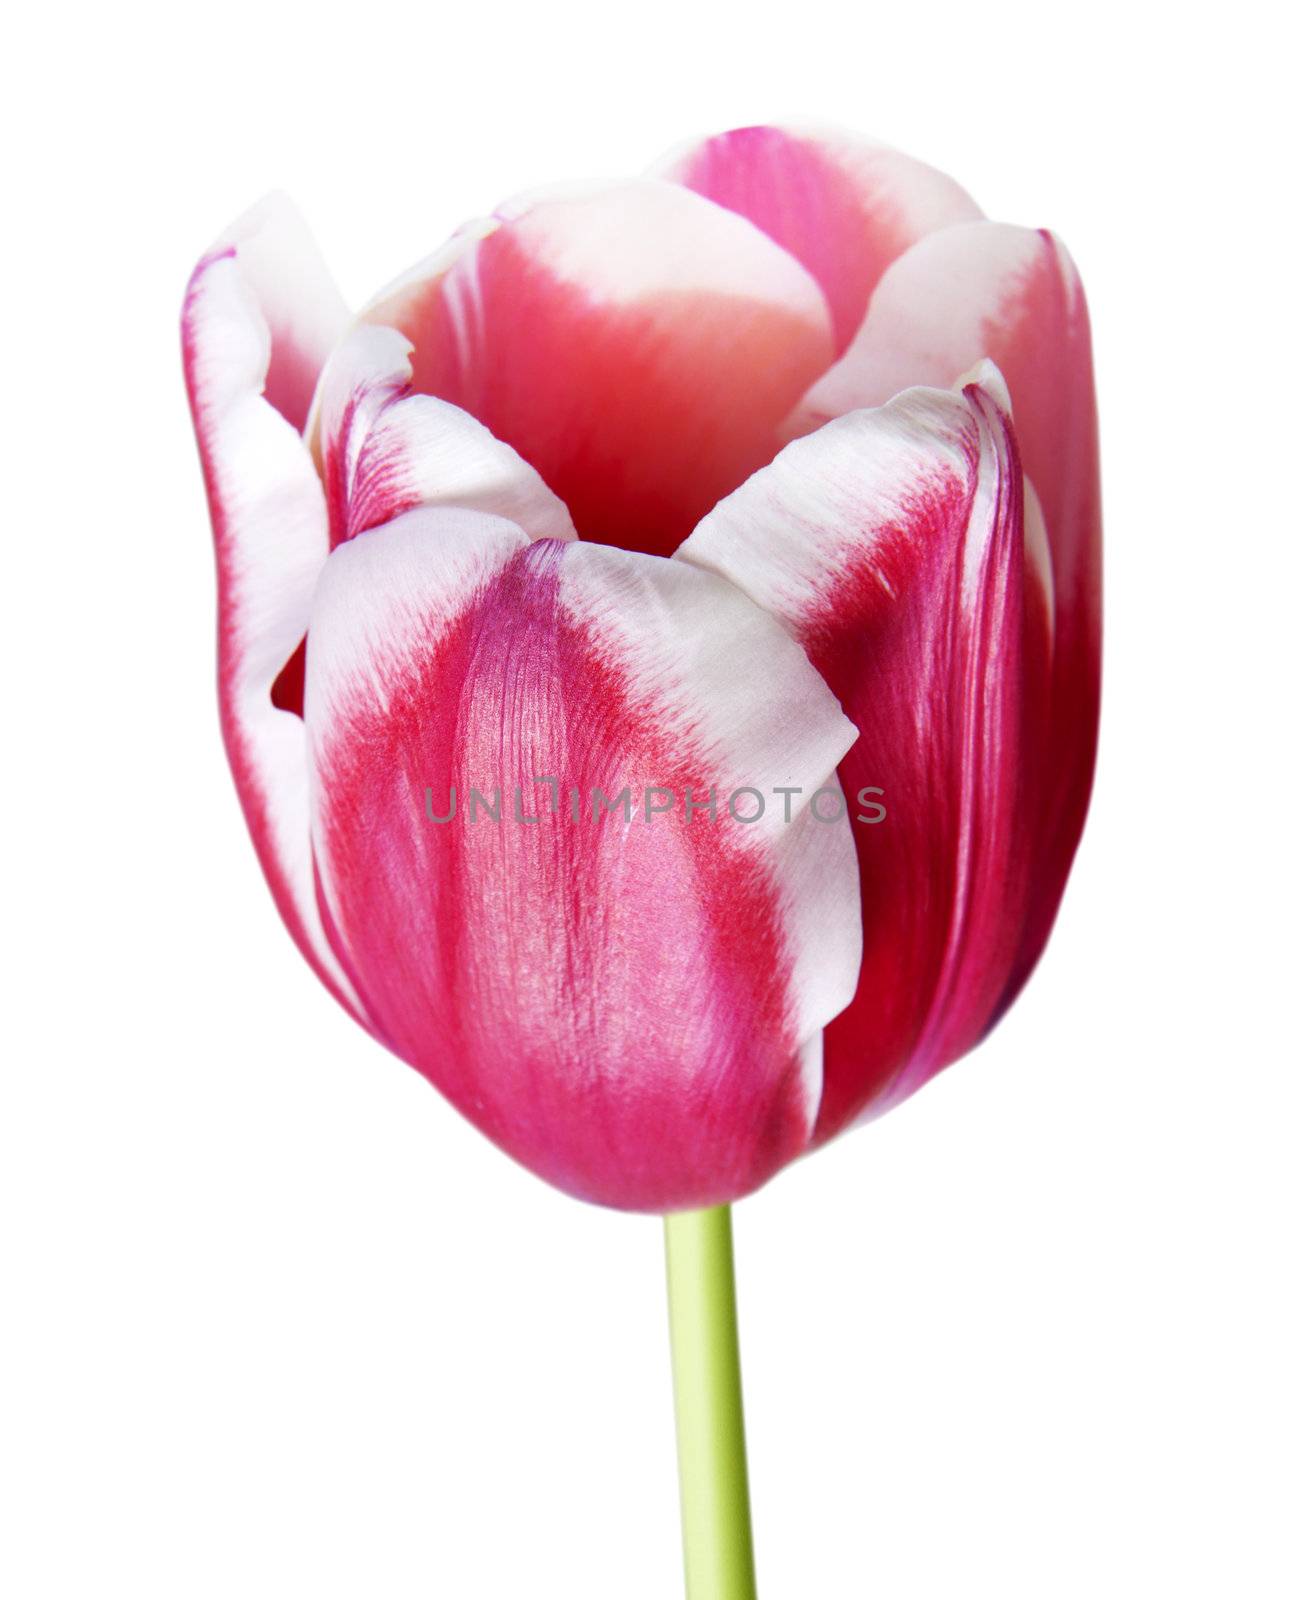 Closeup petals of pink tulip on white background with path